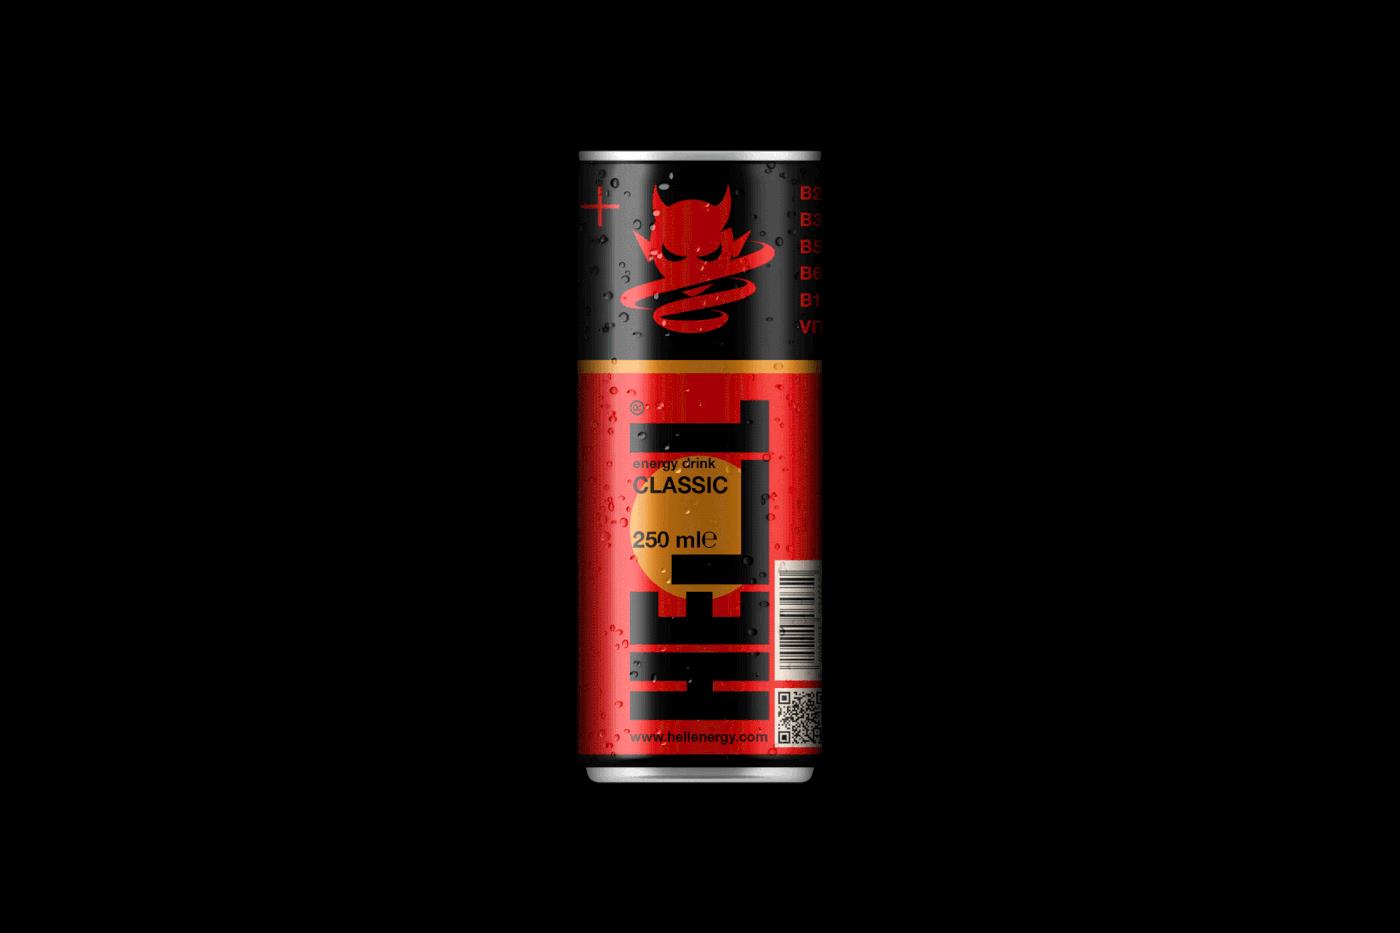 HELL ENERGY DRINK OFFER